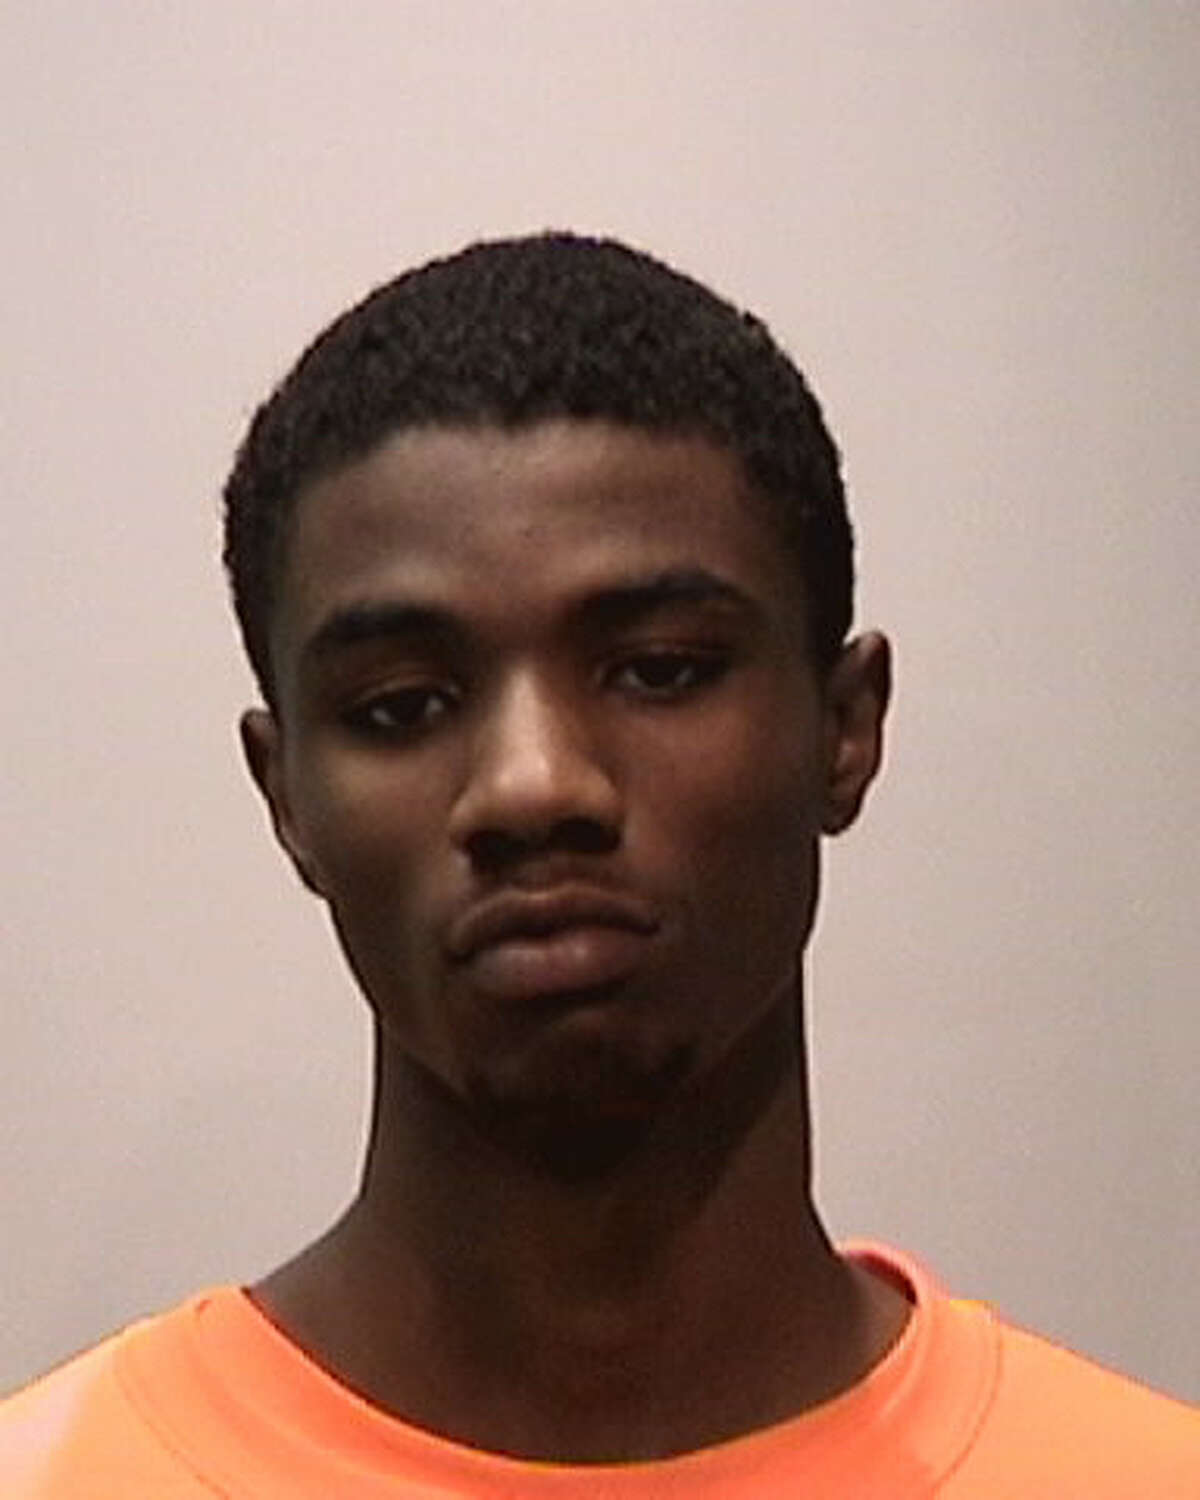 Booking photo of Lamonte Mims, who has been charged with the murder of 71-year-old Edward French in Twin Peaks.